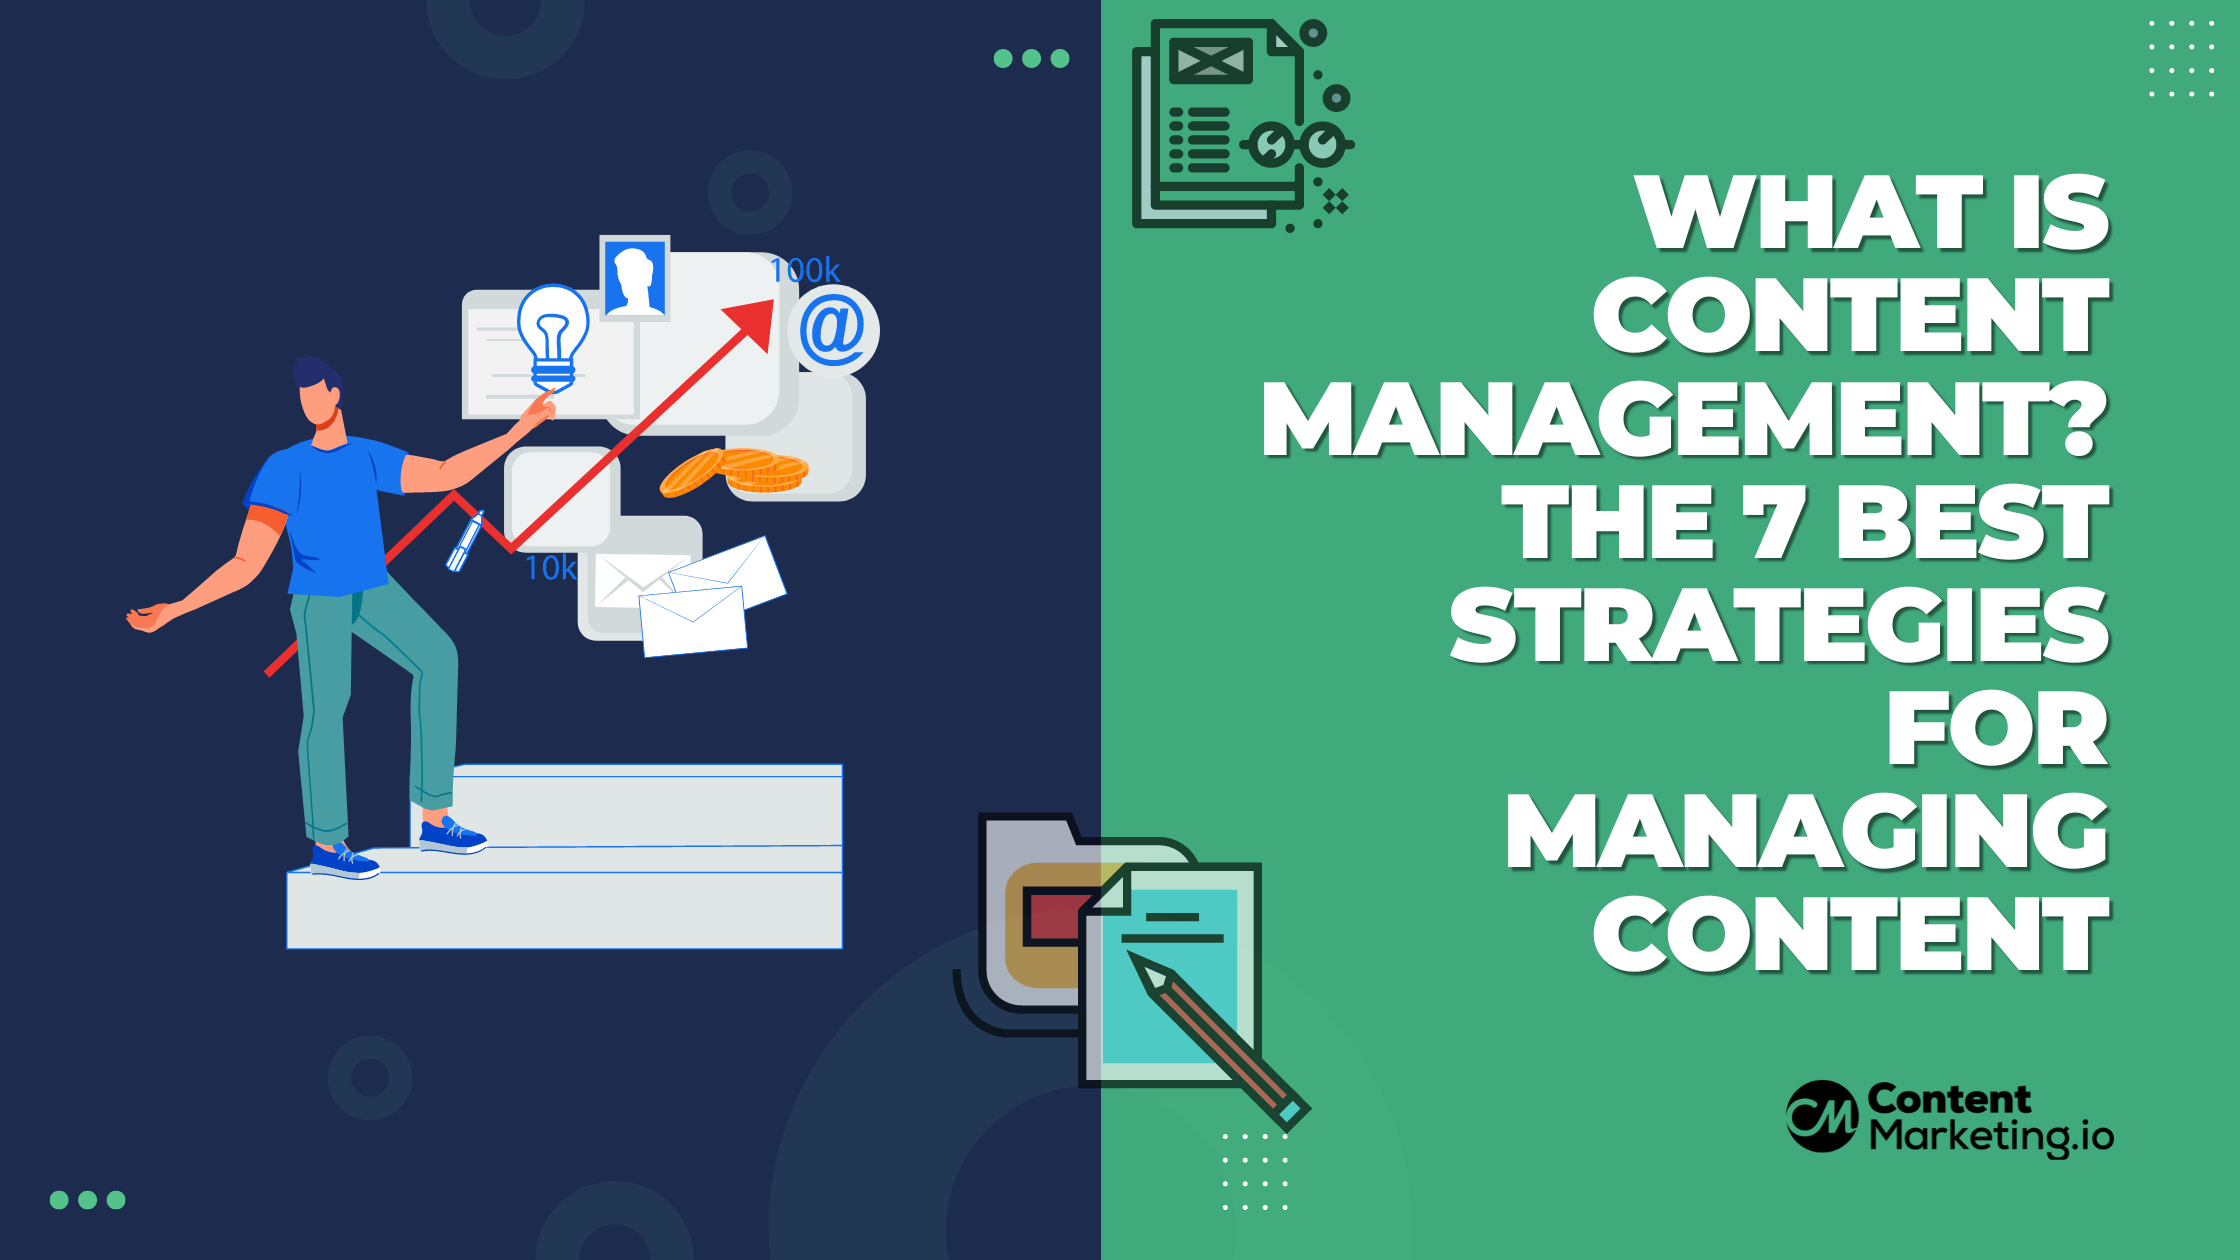 7 Best Strategies for Content Management